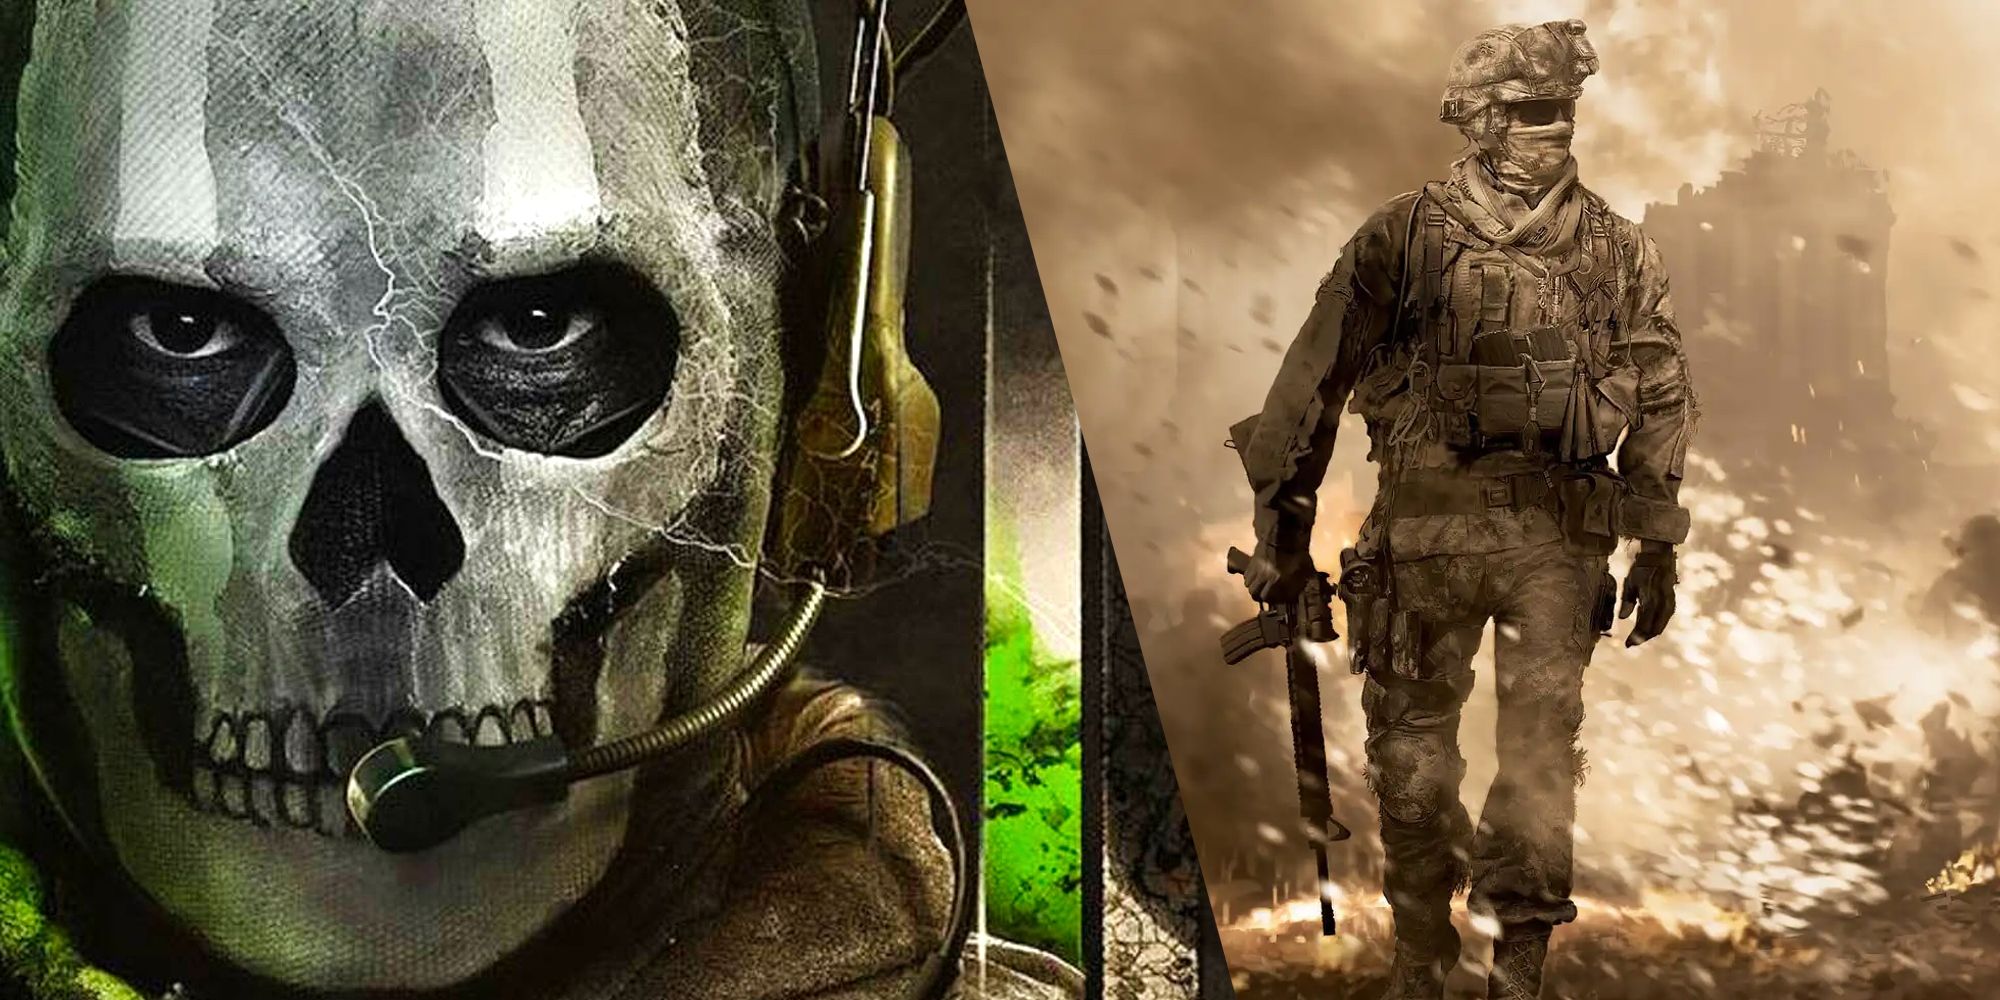 Image of Ghost from 2022's MW2 next to the 2009 MW2 logo of a lone soldier.